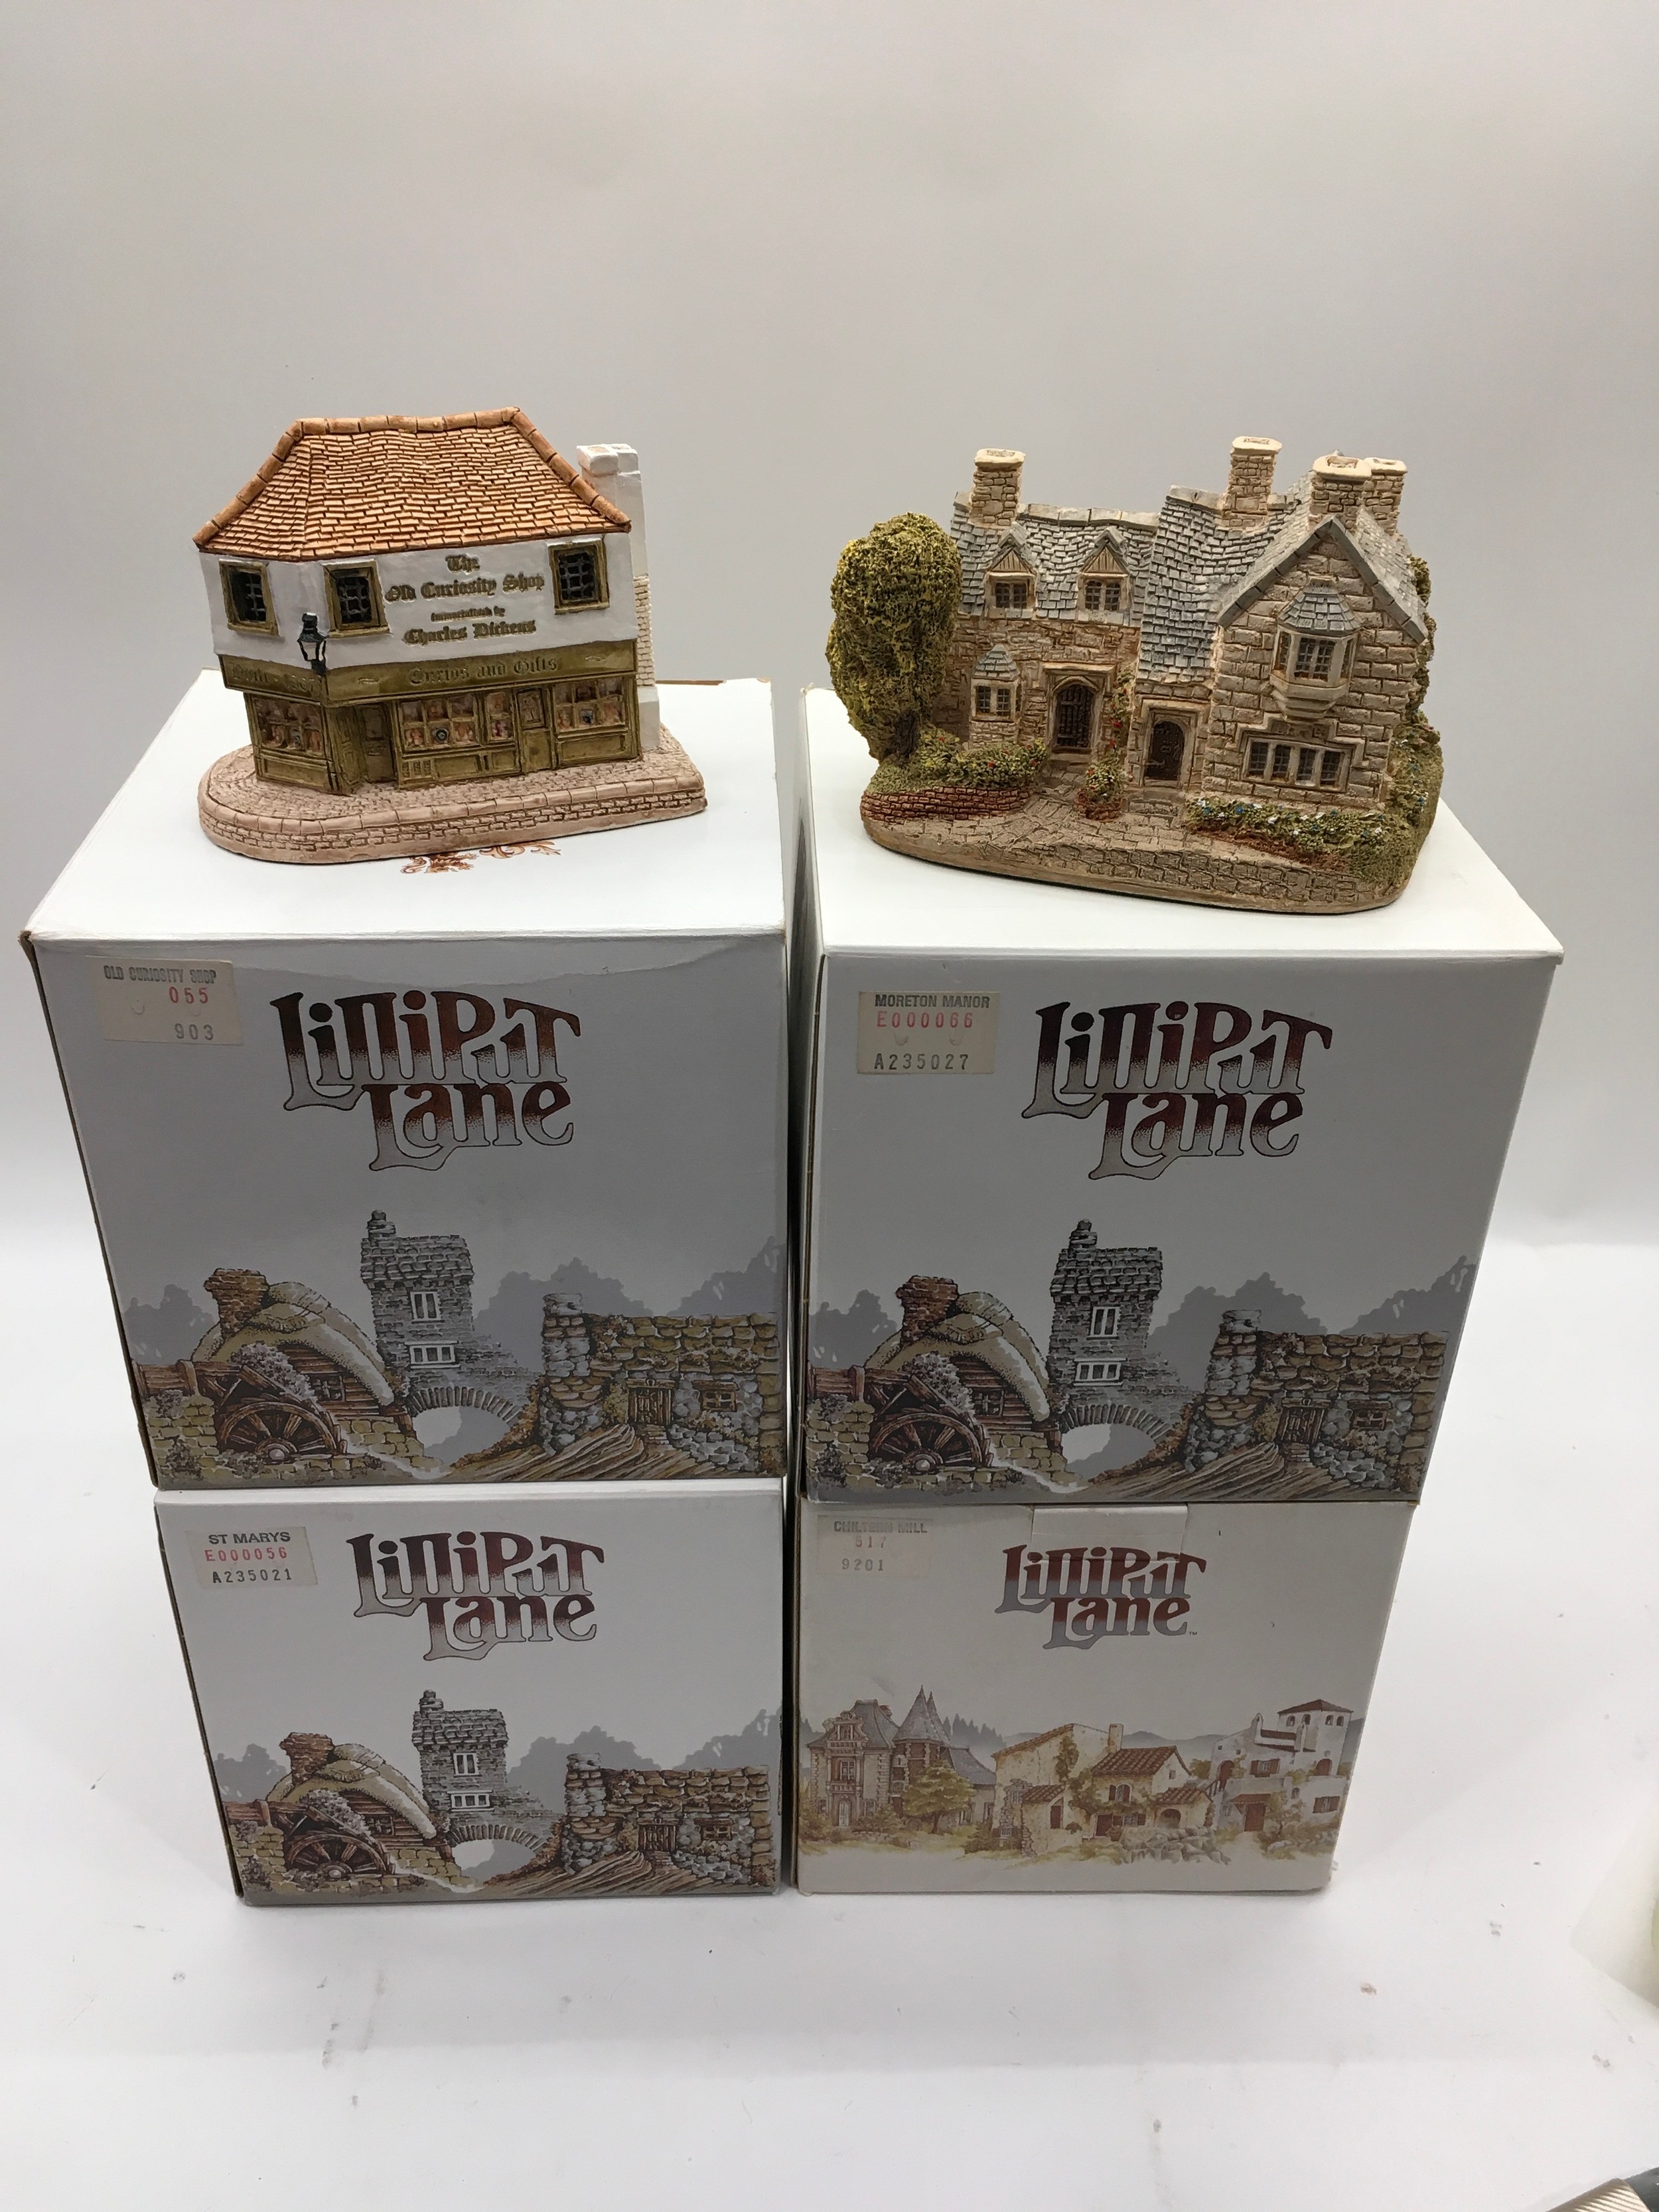 Four Lilliput Lane cottages to incl. Chiltern Hall 517, St Marys 56, Old curiosity shop 055 and